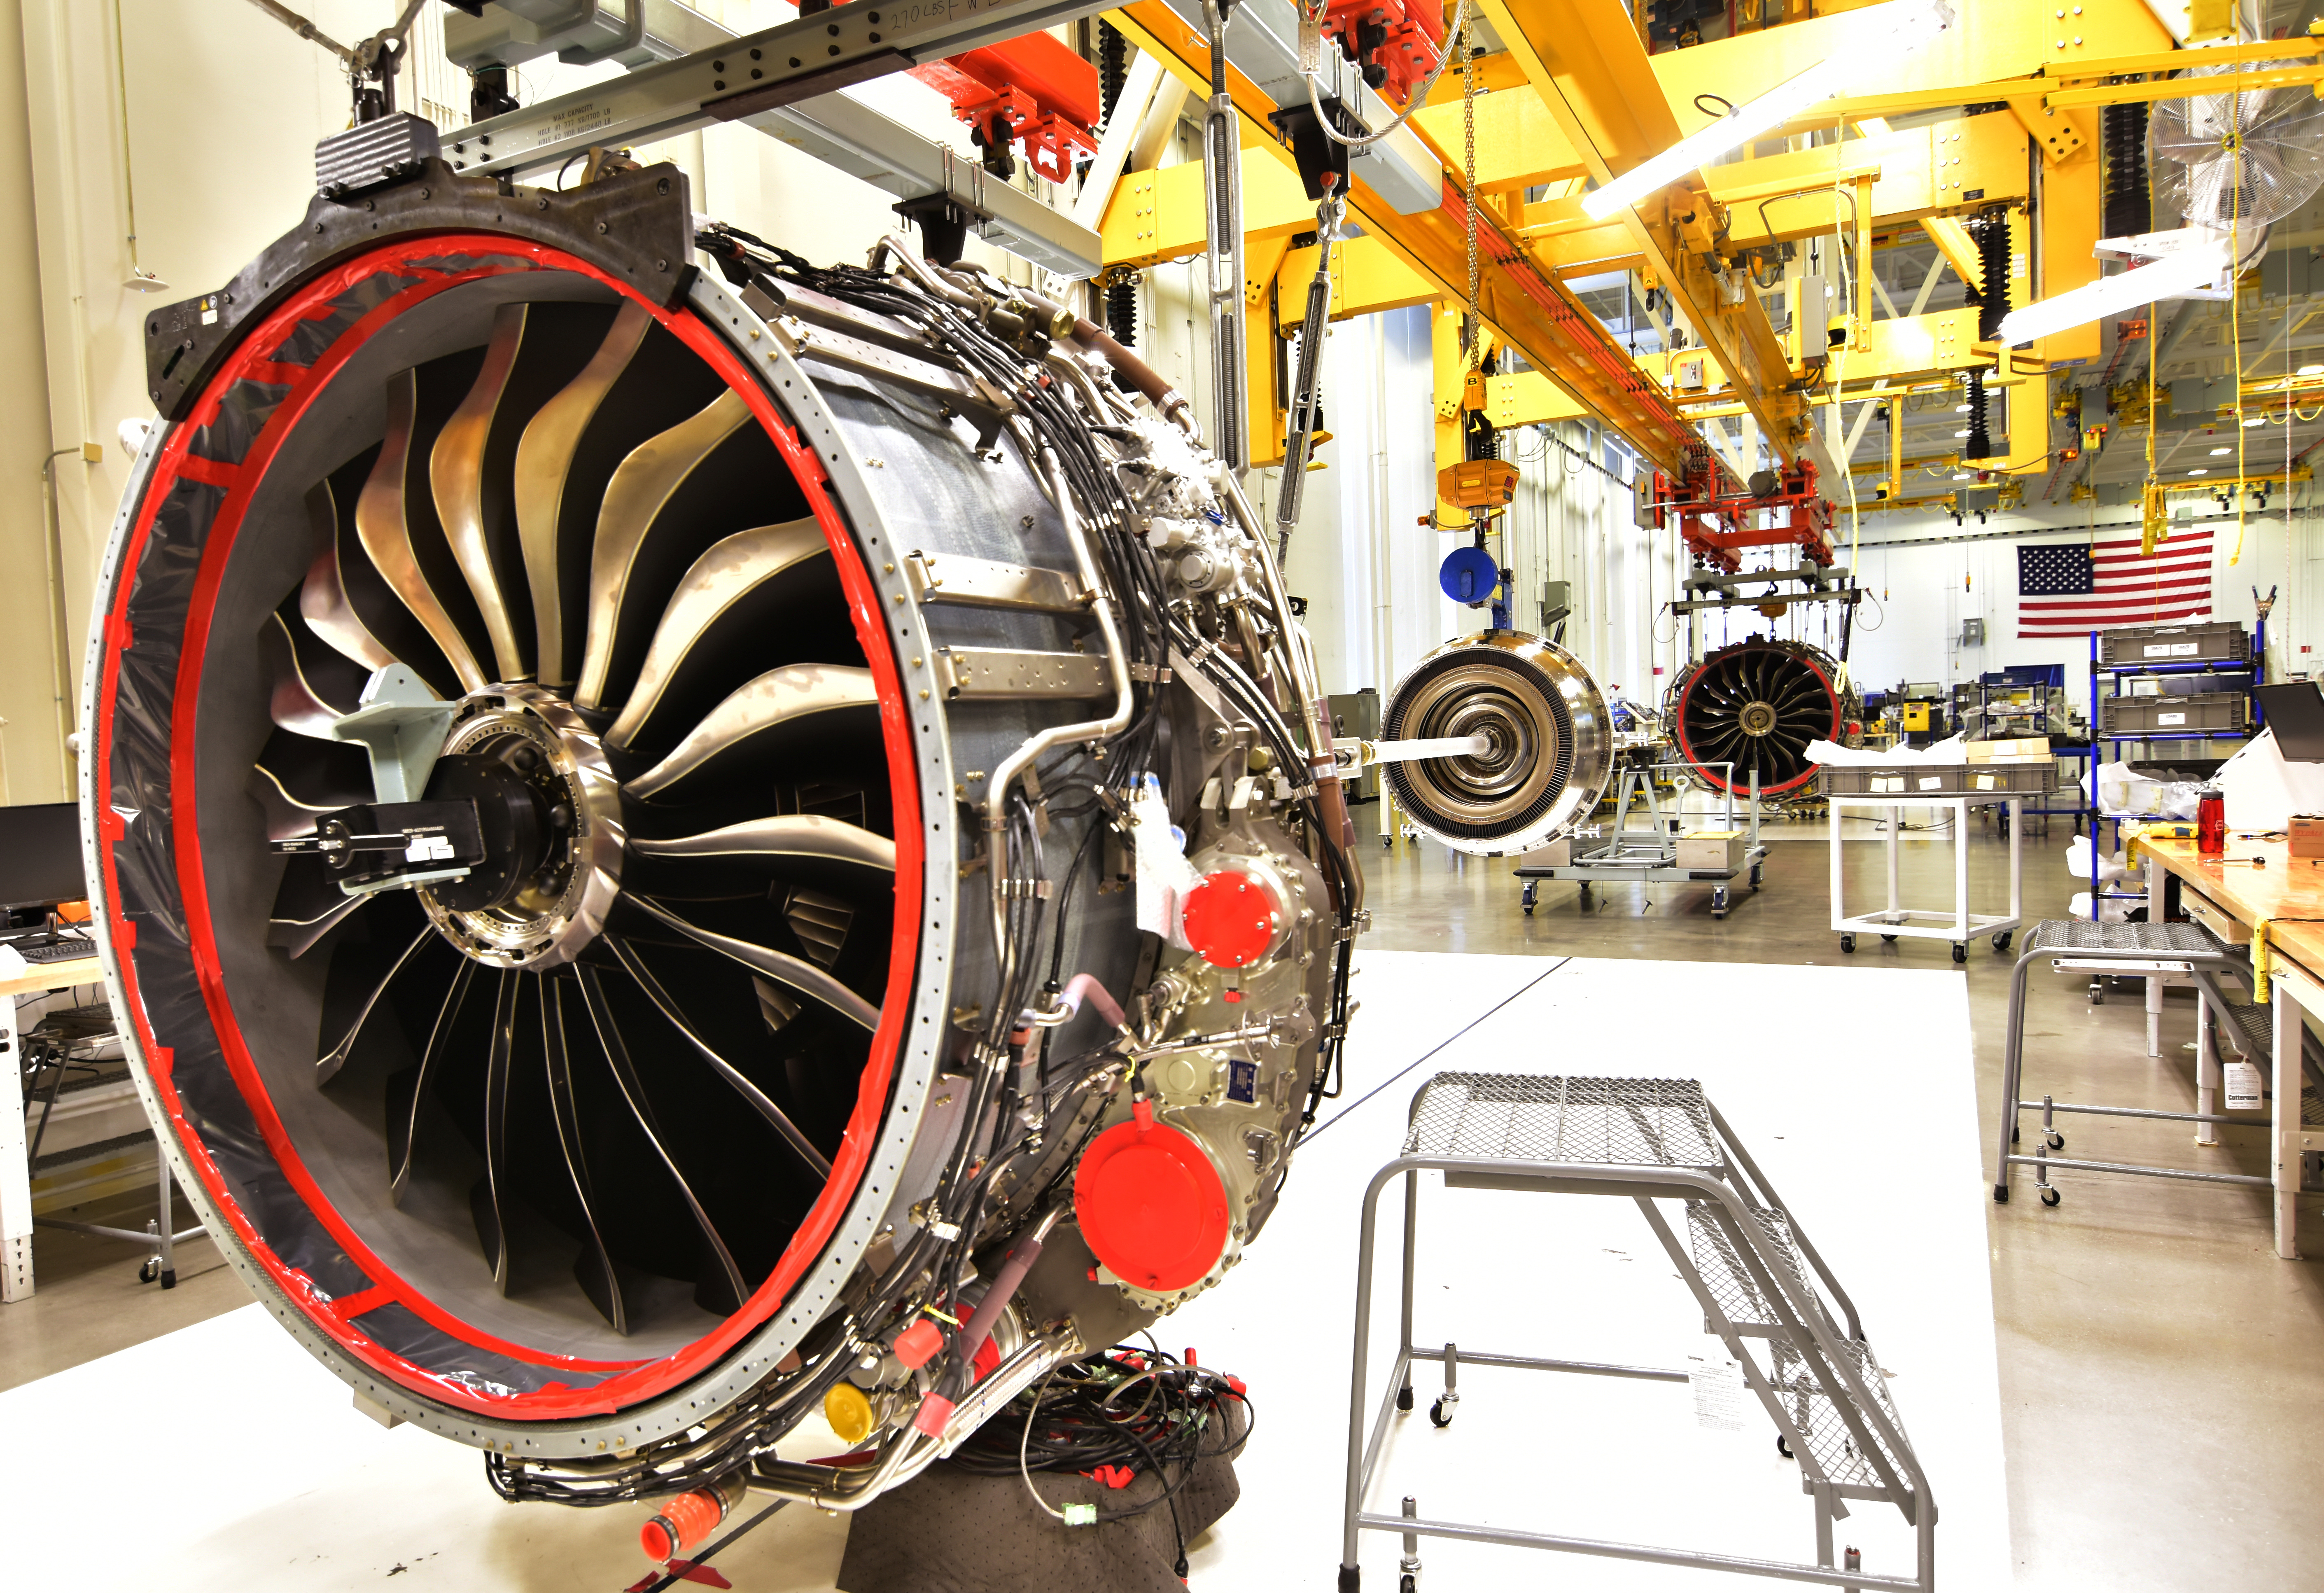 Technicians build LEAP engines for jetliners at a new, highly automated General Electric (GE) factory in Lafayette